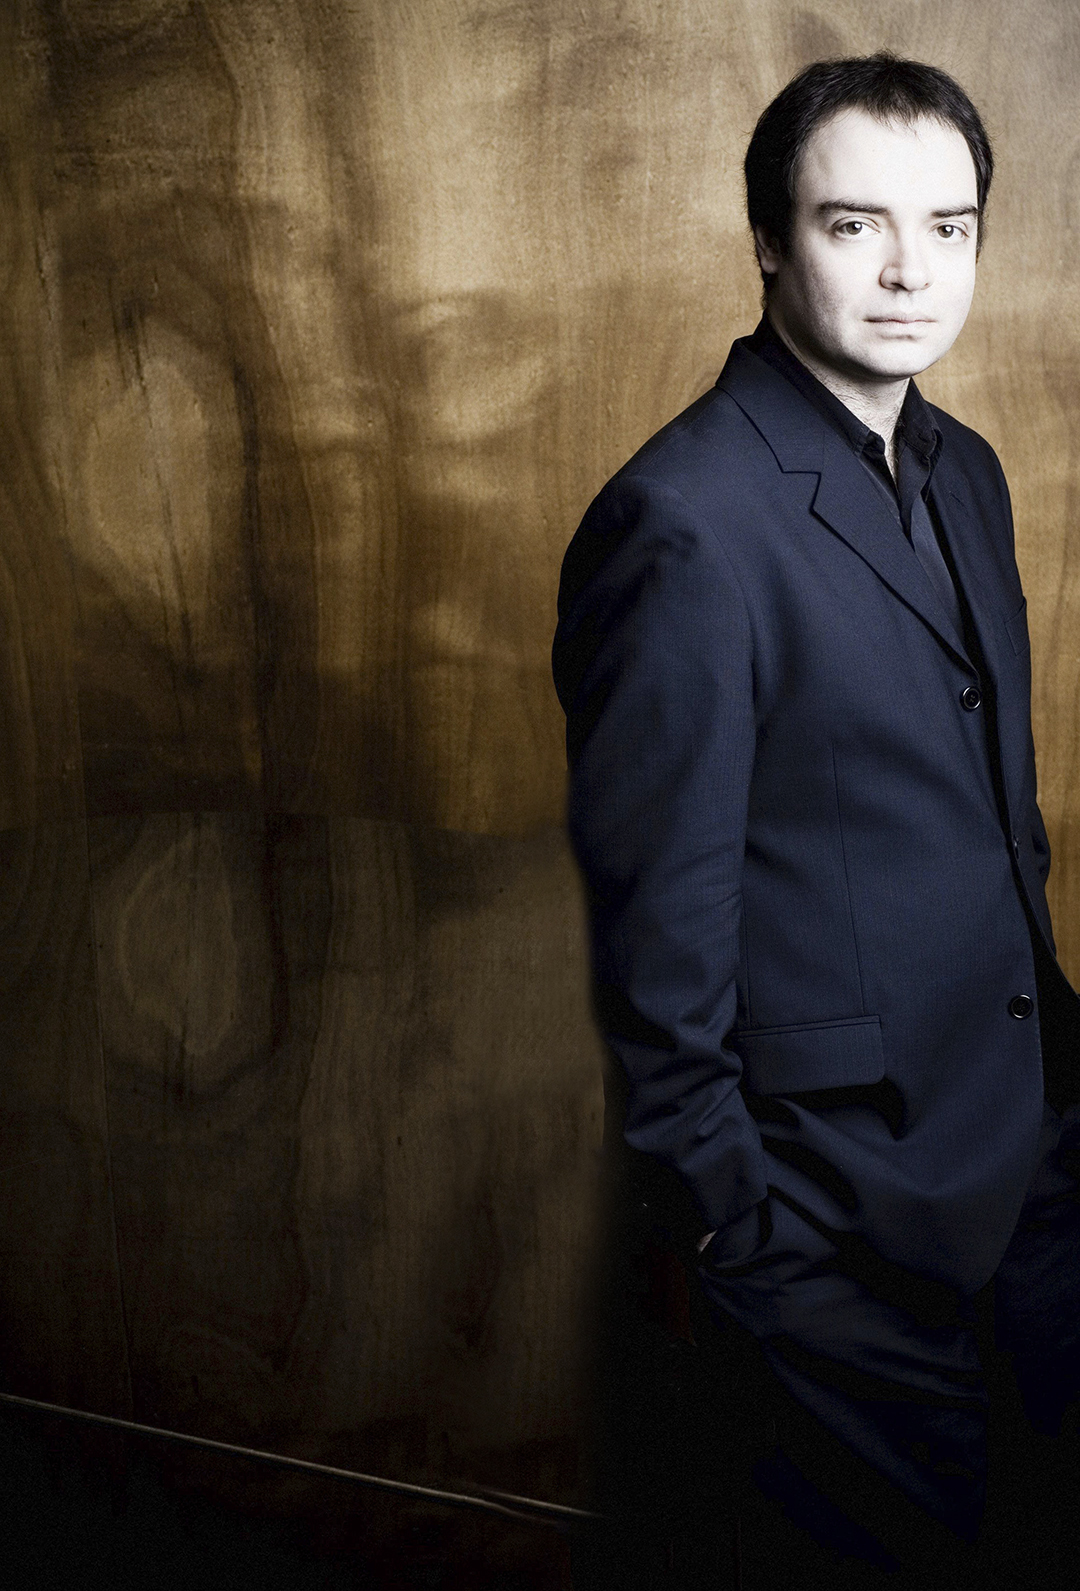 Alexander Melnikov’s epic piano recital will be “life-changing.” Photo by Marco Borggreve